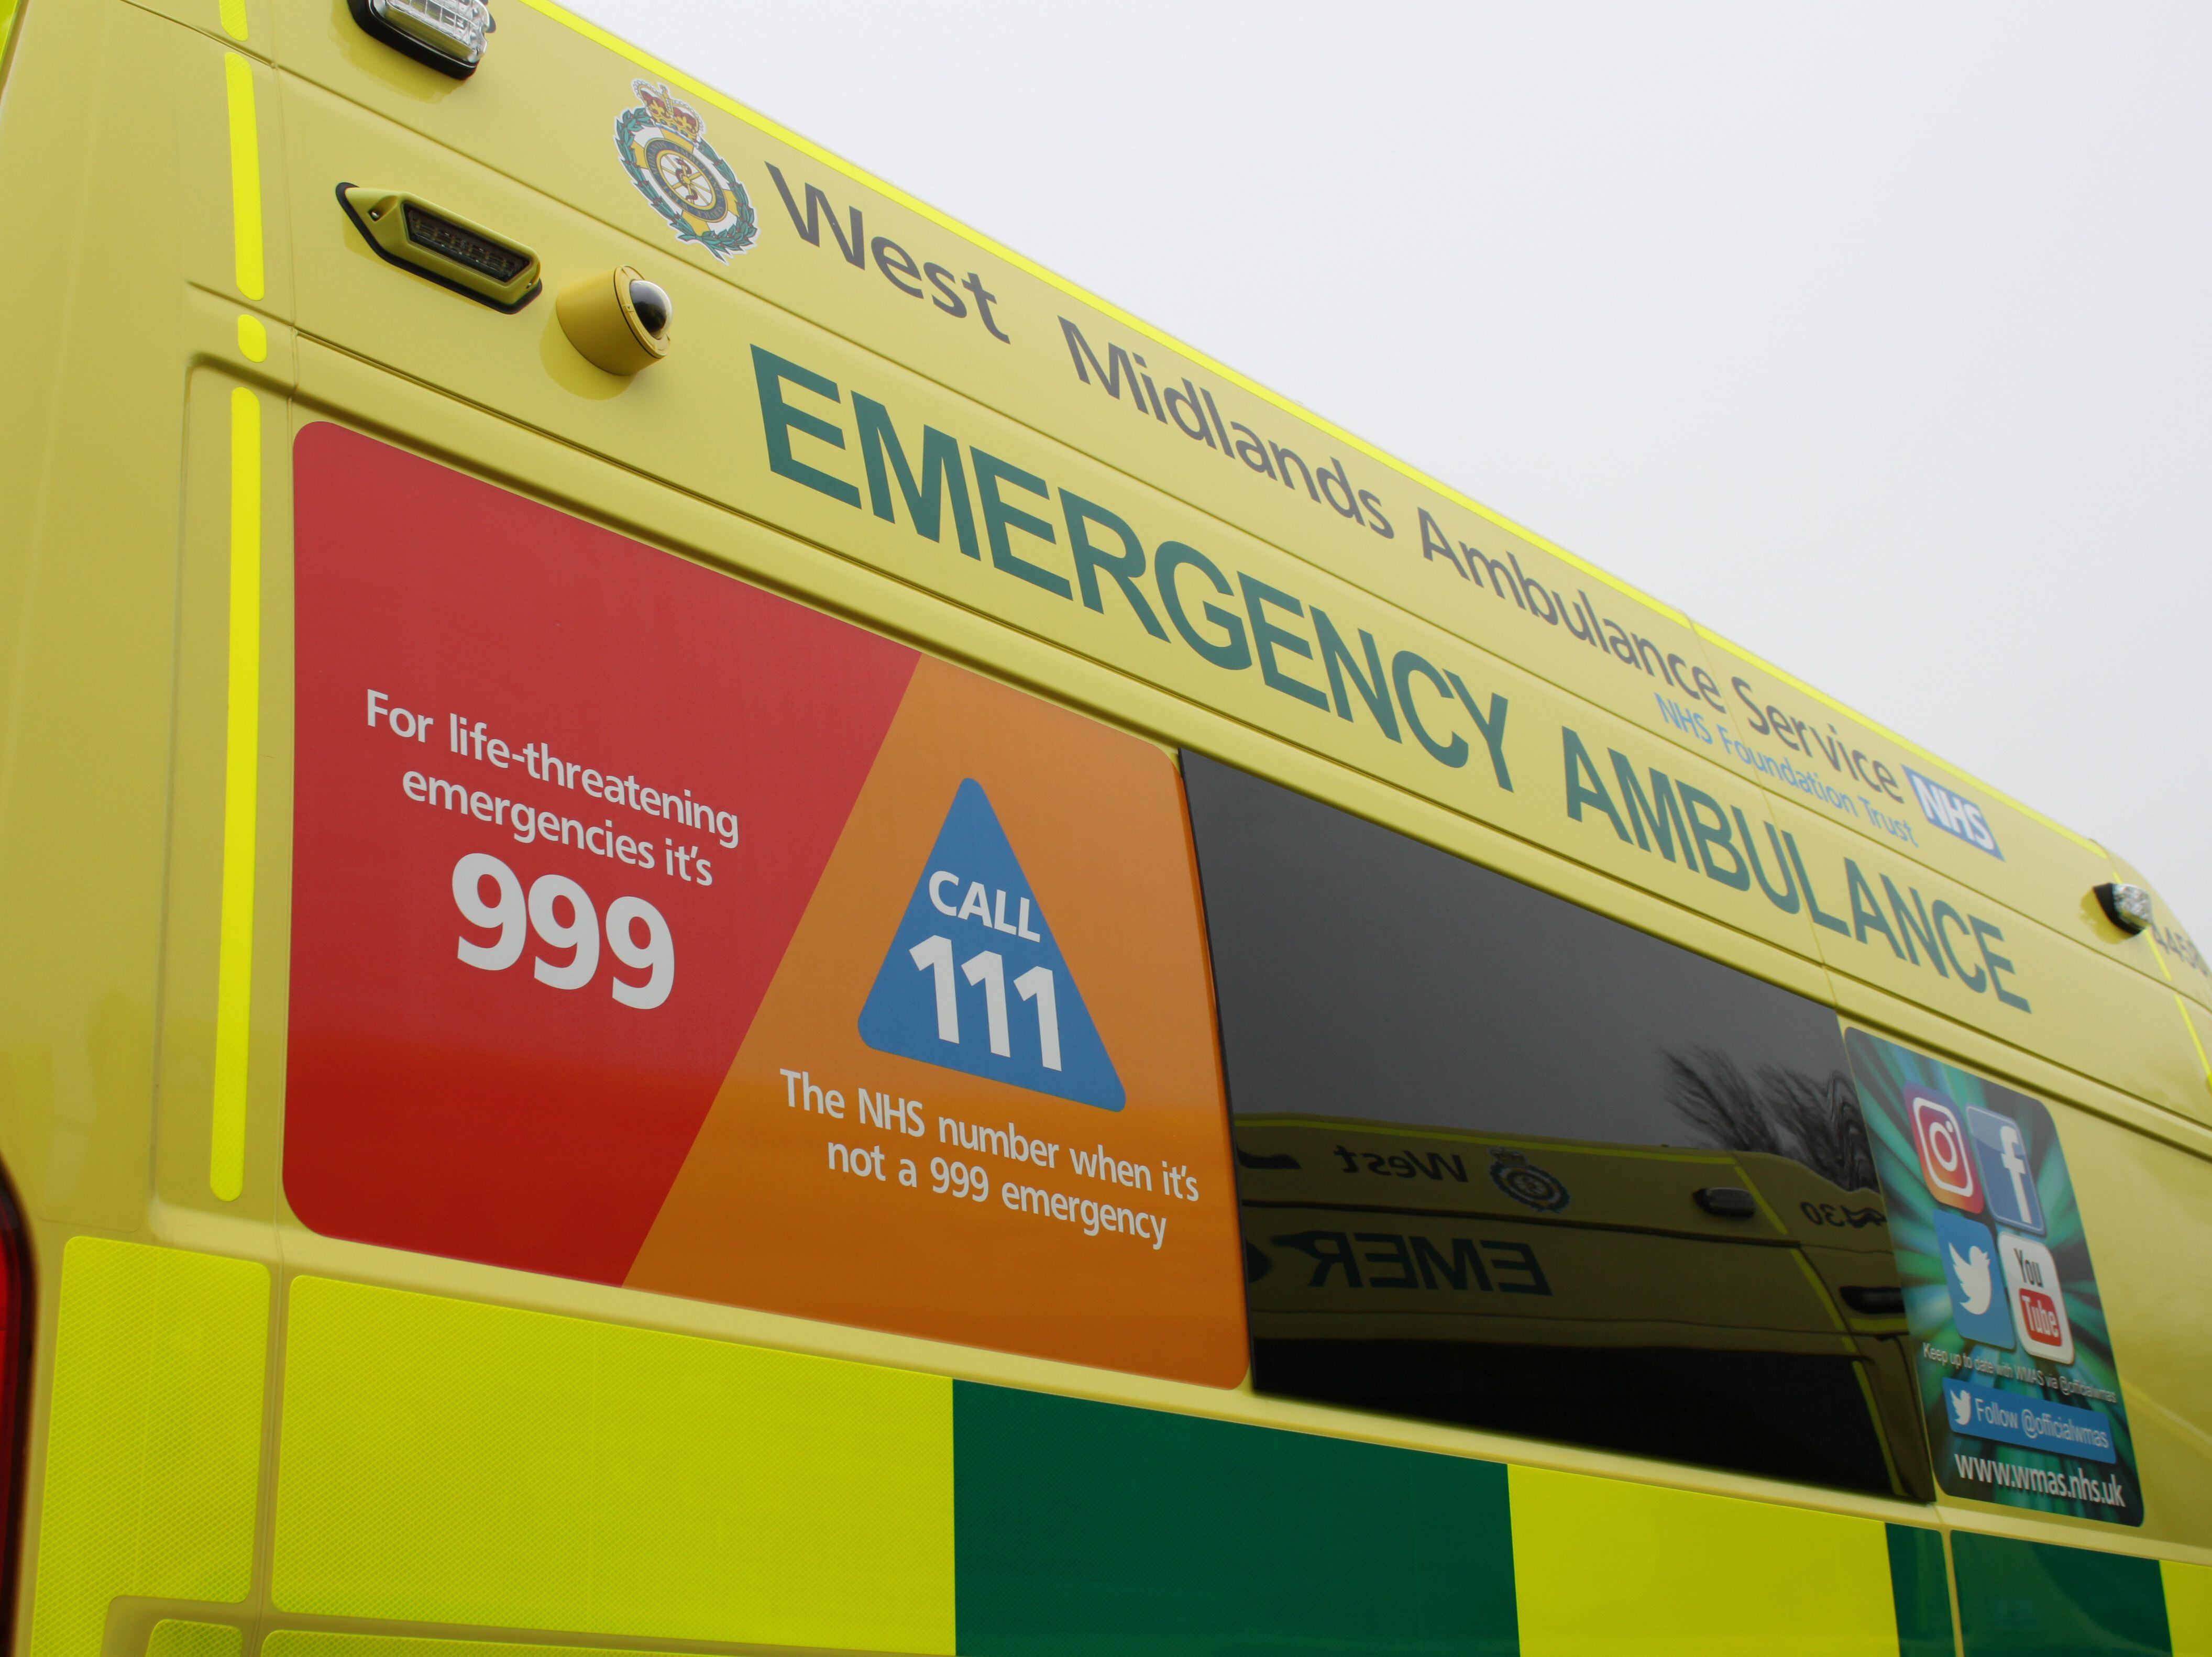 Over 500 apply to become trainee paramedics 